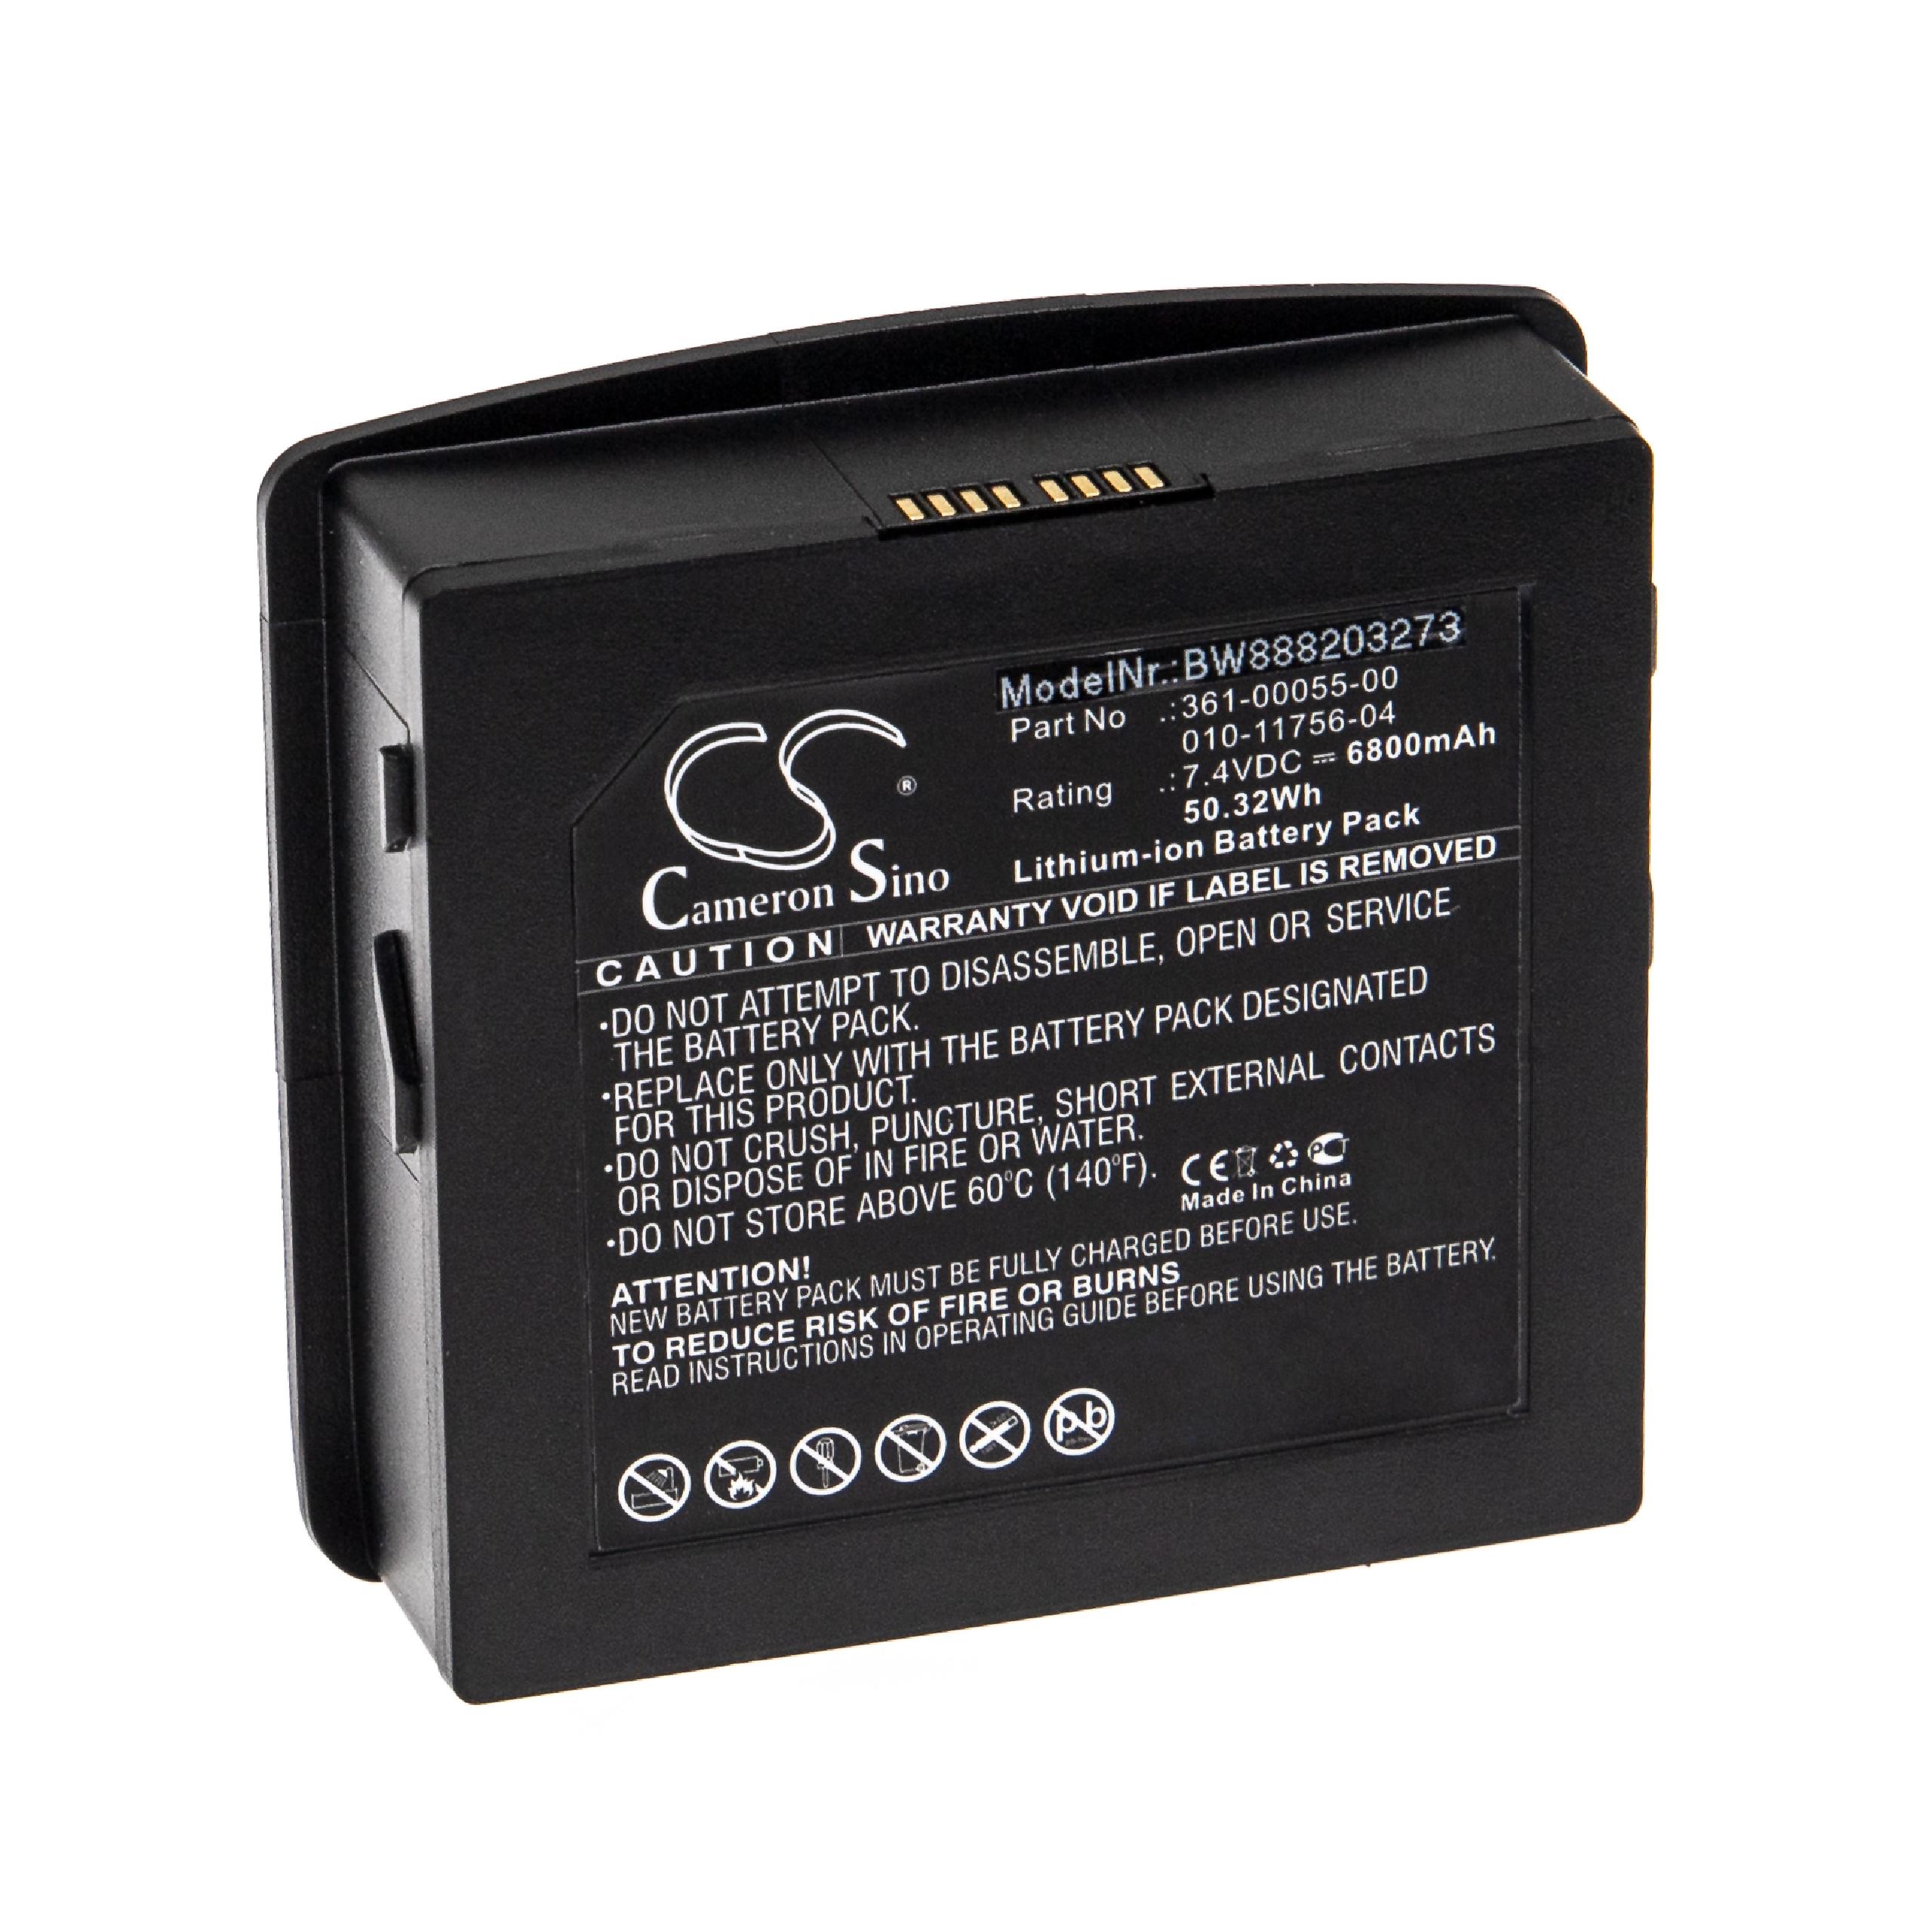 GPS Battery Replacement for Garmin 361-00055-00, 010-11756-04 - 6800mAh, 7.4V